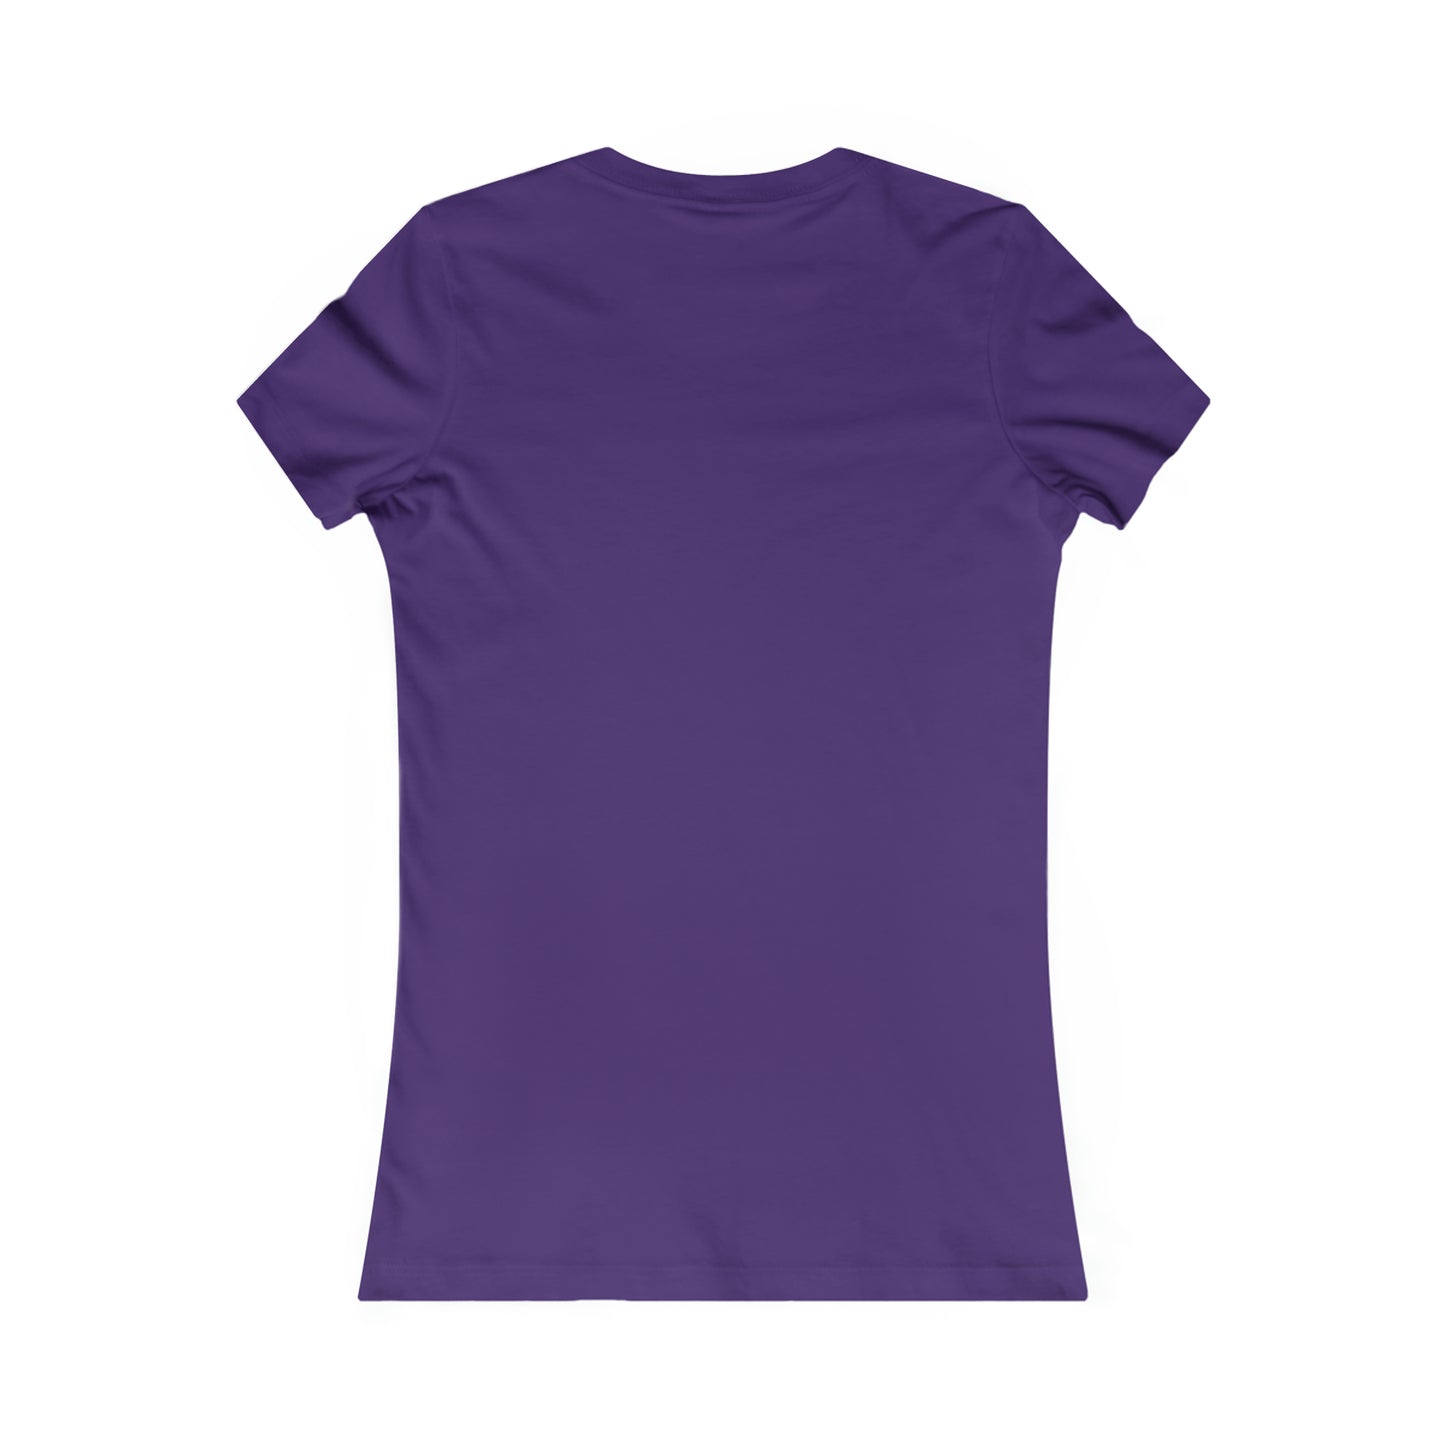 NAAMS Women's Design your Own Favorite Tee - 4.2 oz 100% airlume Cotton